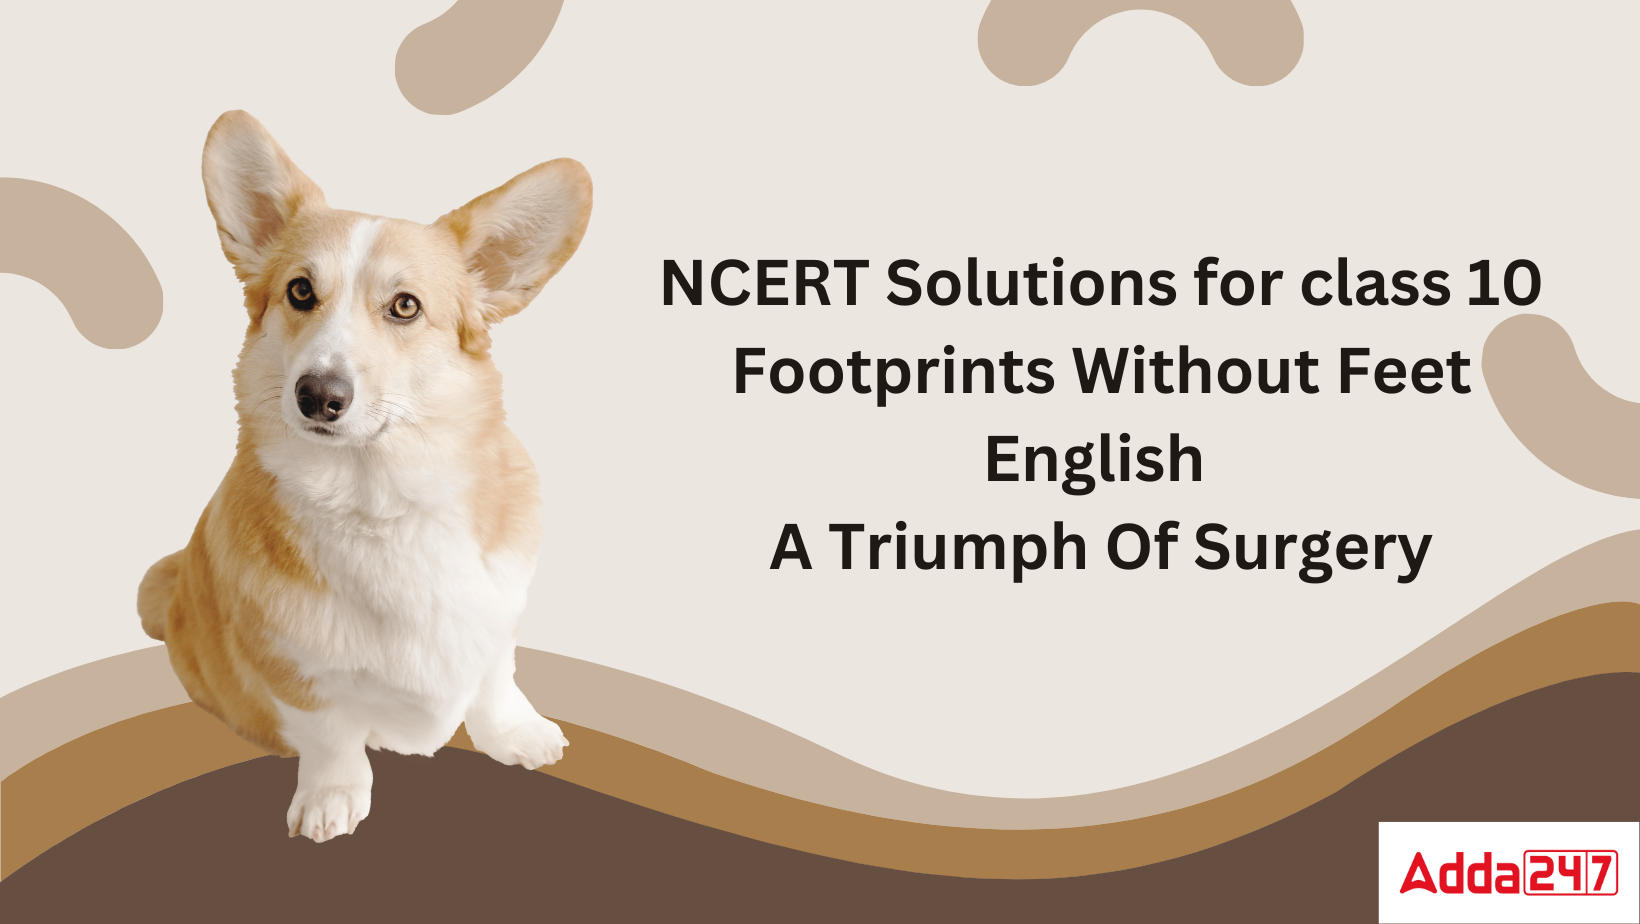 NCERT Solutions for class 10 Footprints Without Feet English A Triumph Of Surgery